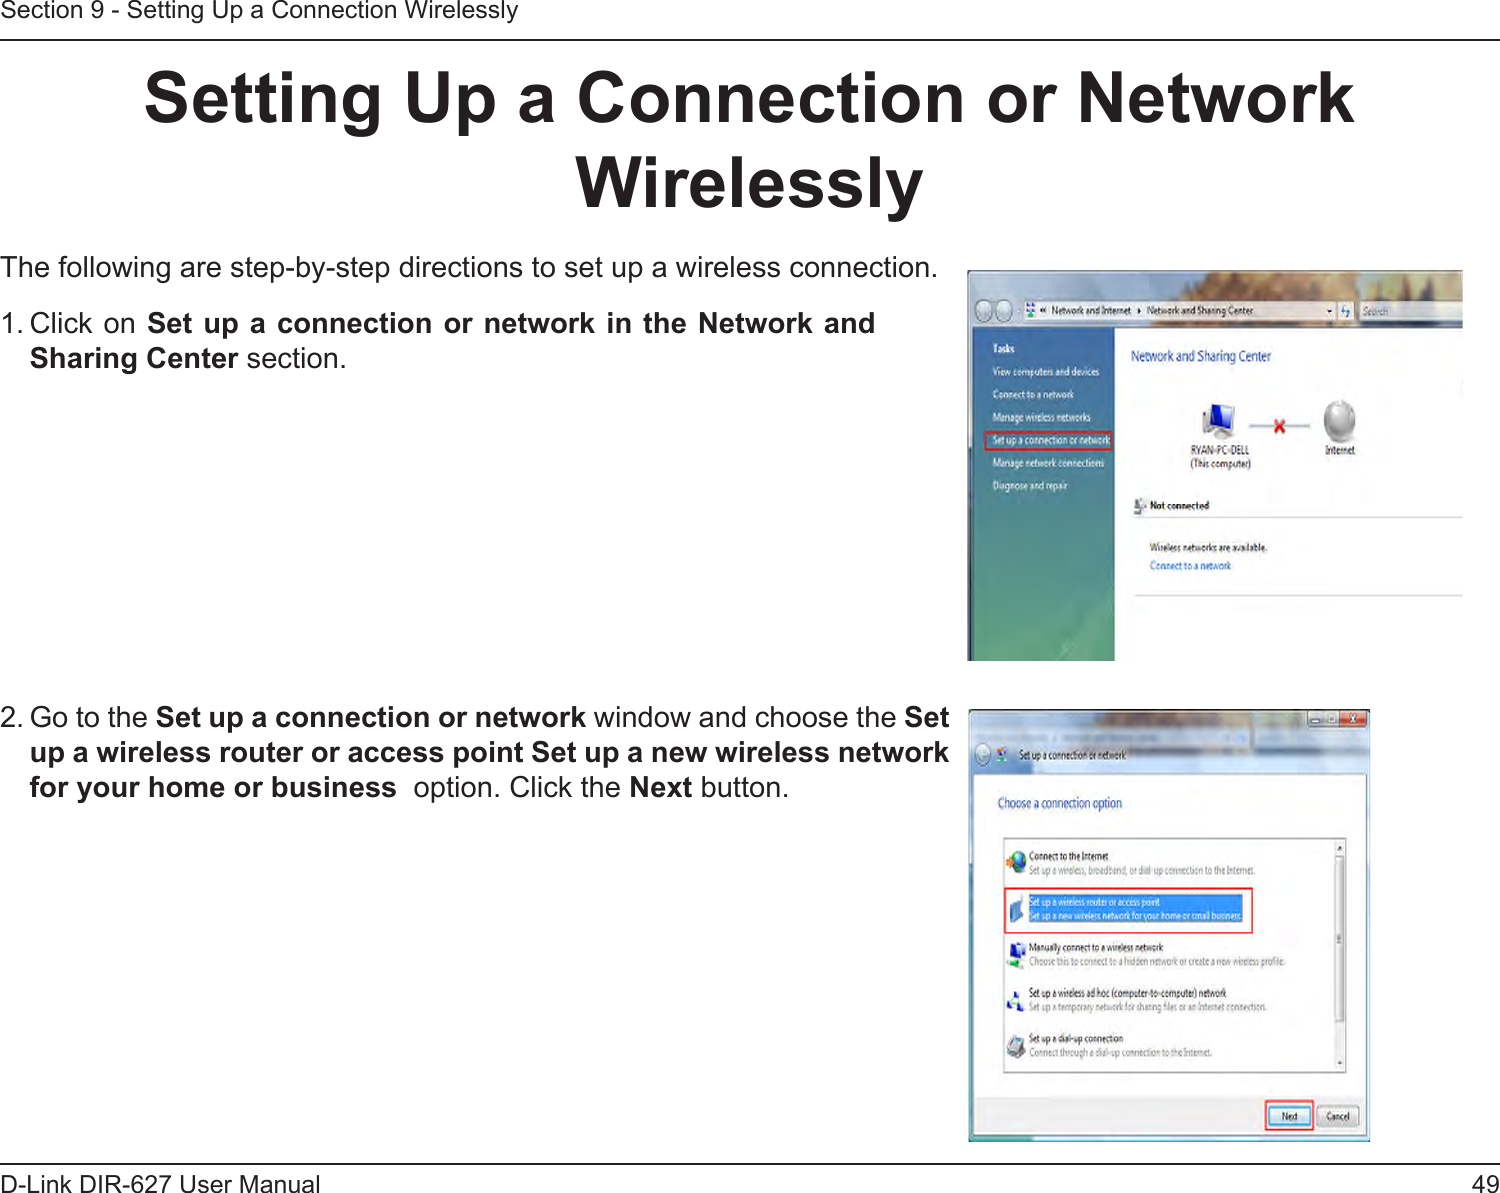 49D-Link DIR-627 User ManualSection 9 - Setting Up a Connection WirelesslySettingUpaConnectionorNetworkWirelesslyThe following are step-by-step directions to set up a wireless connection.2. Go to the Setupaconnectionornetworkwindow and choose the Set upawirelessrouteroraccesspointSetupanewwirelessnetworkforyourhomeorbusiness option. Click the Next button. 1. Click on SetupaconnectionornetworkintheNetworkandSharingCentersection. 